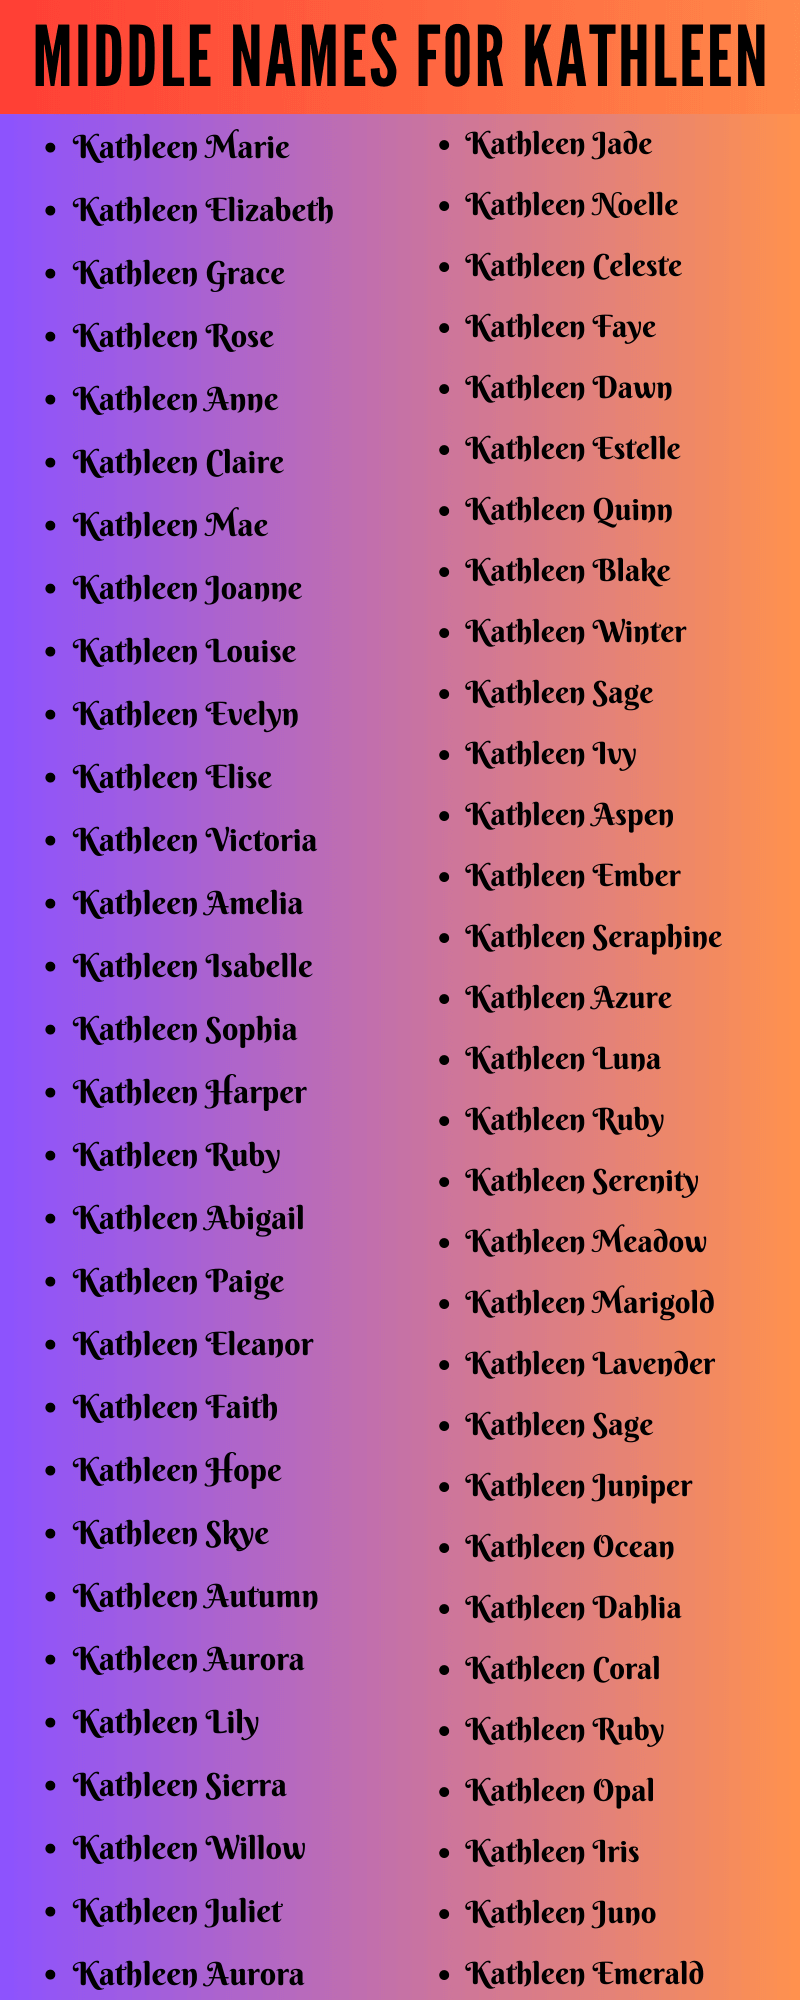  400 Unique Middle Names For Kathleen